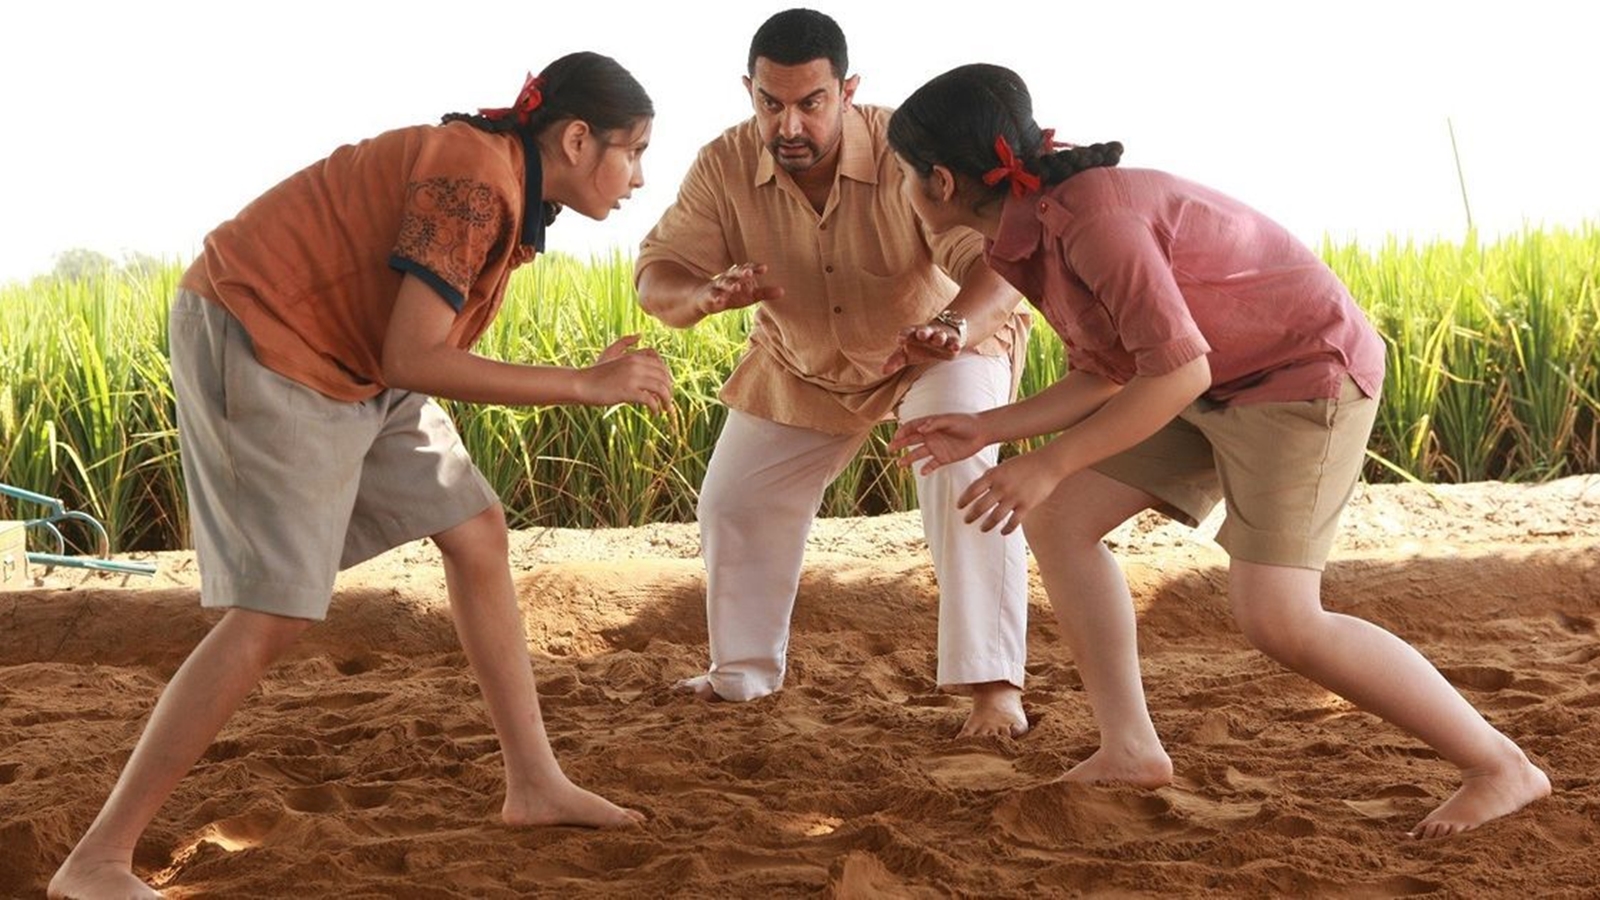 android, siddharth roy kapur decodes how dangal made $200 mn in china, became the biggest indian box office grosser: ‘china is also a patriarchy’